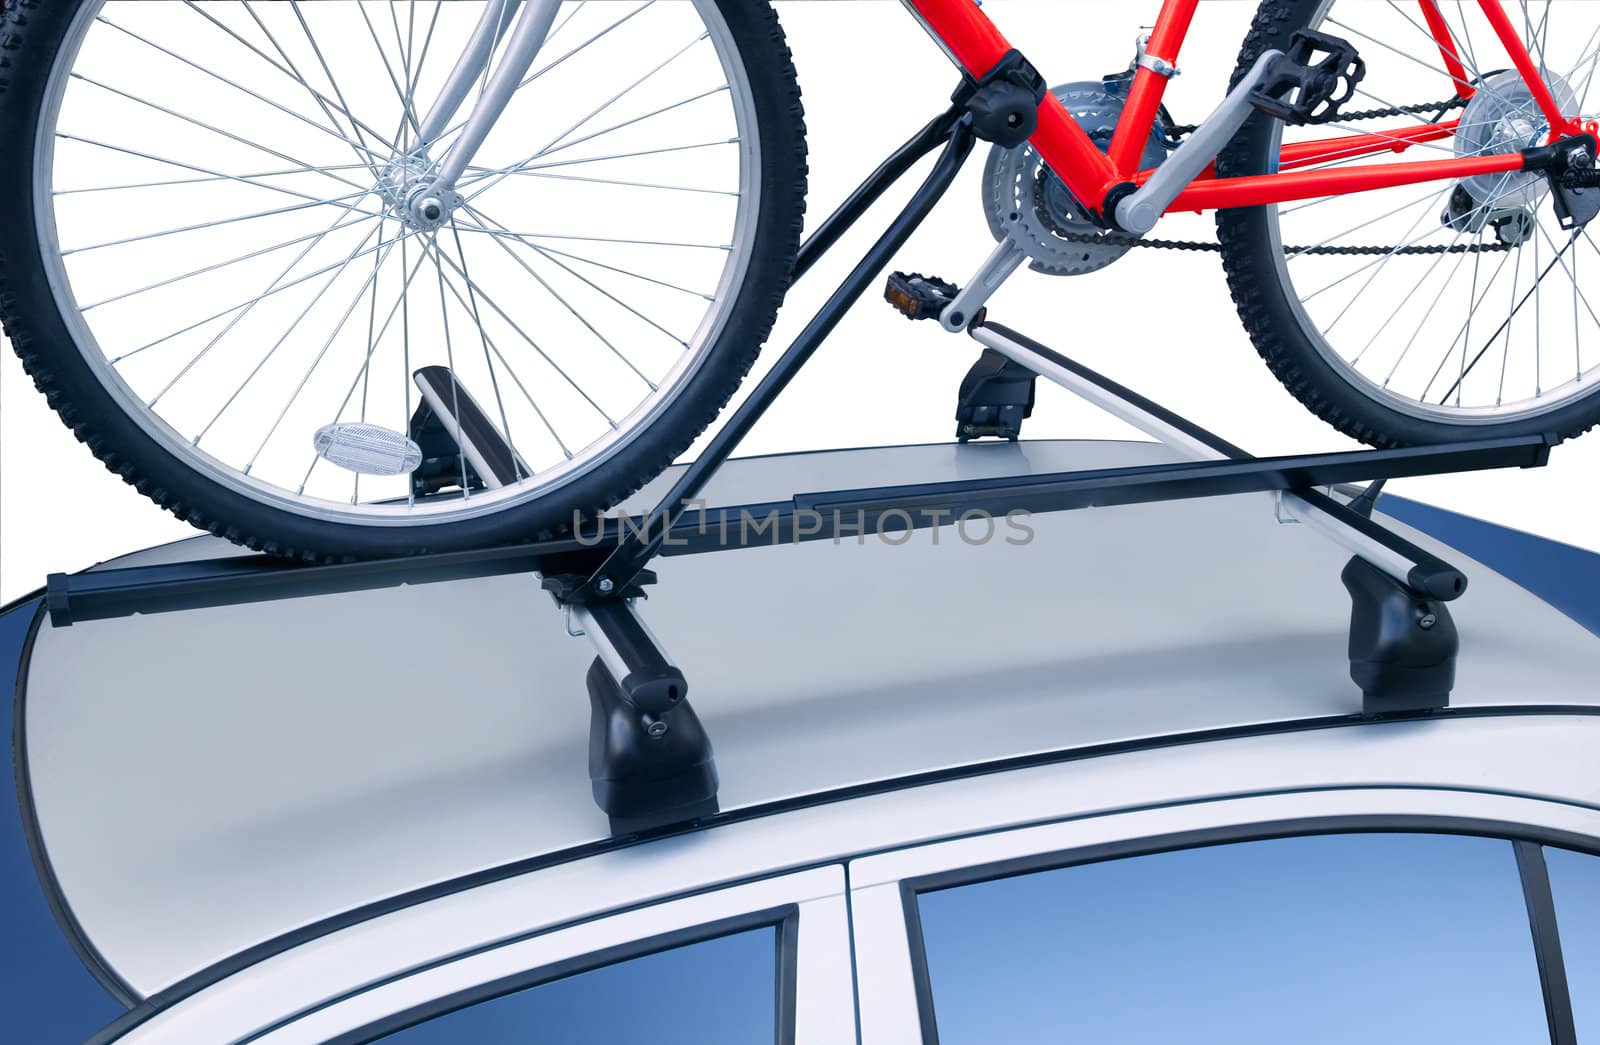 Roof rack with bicycle on. Isolated on white.